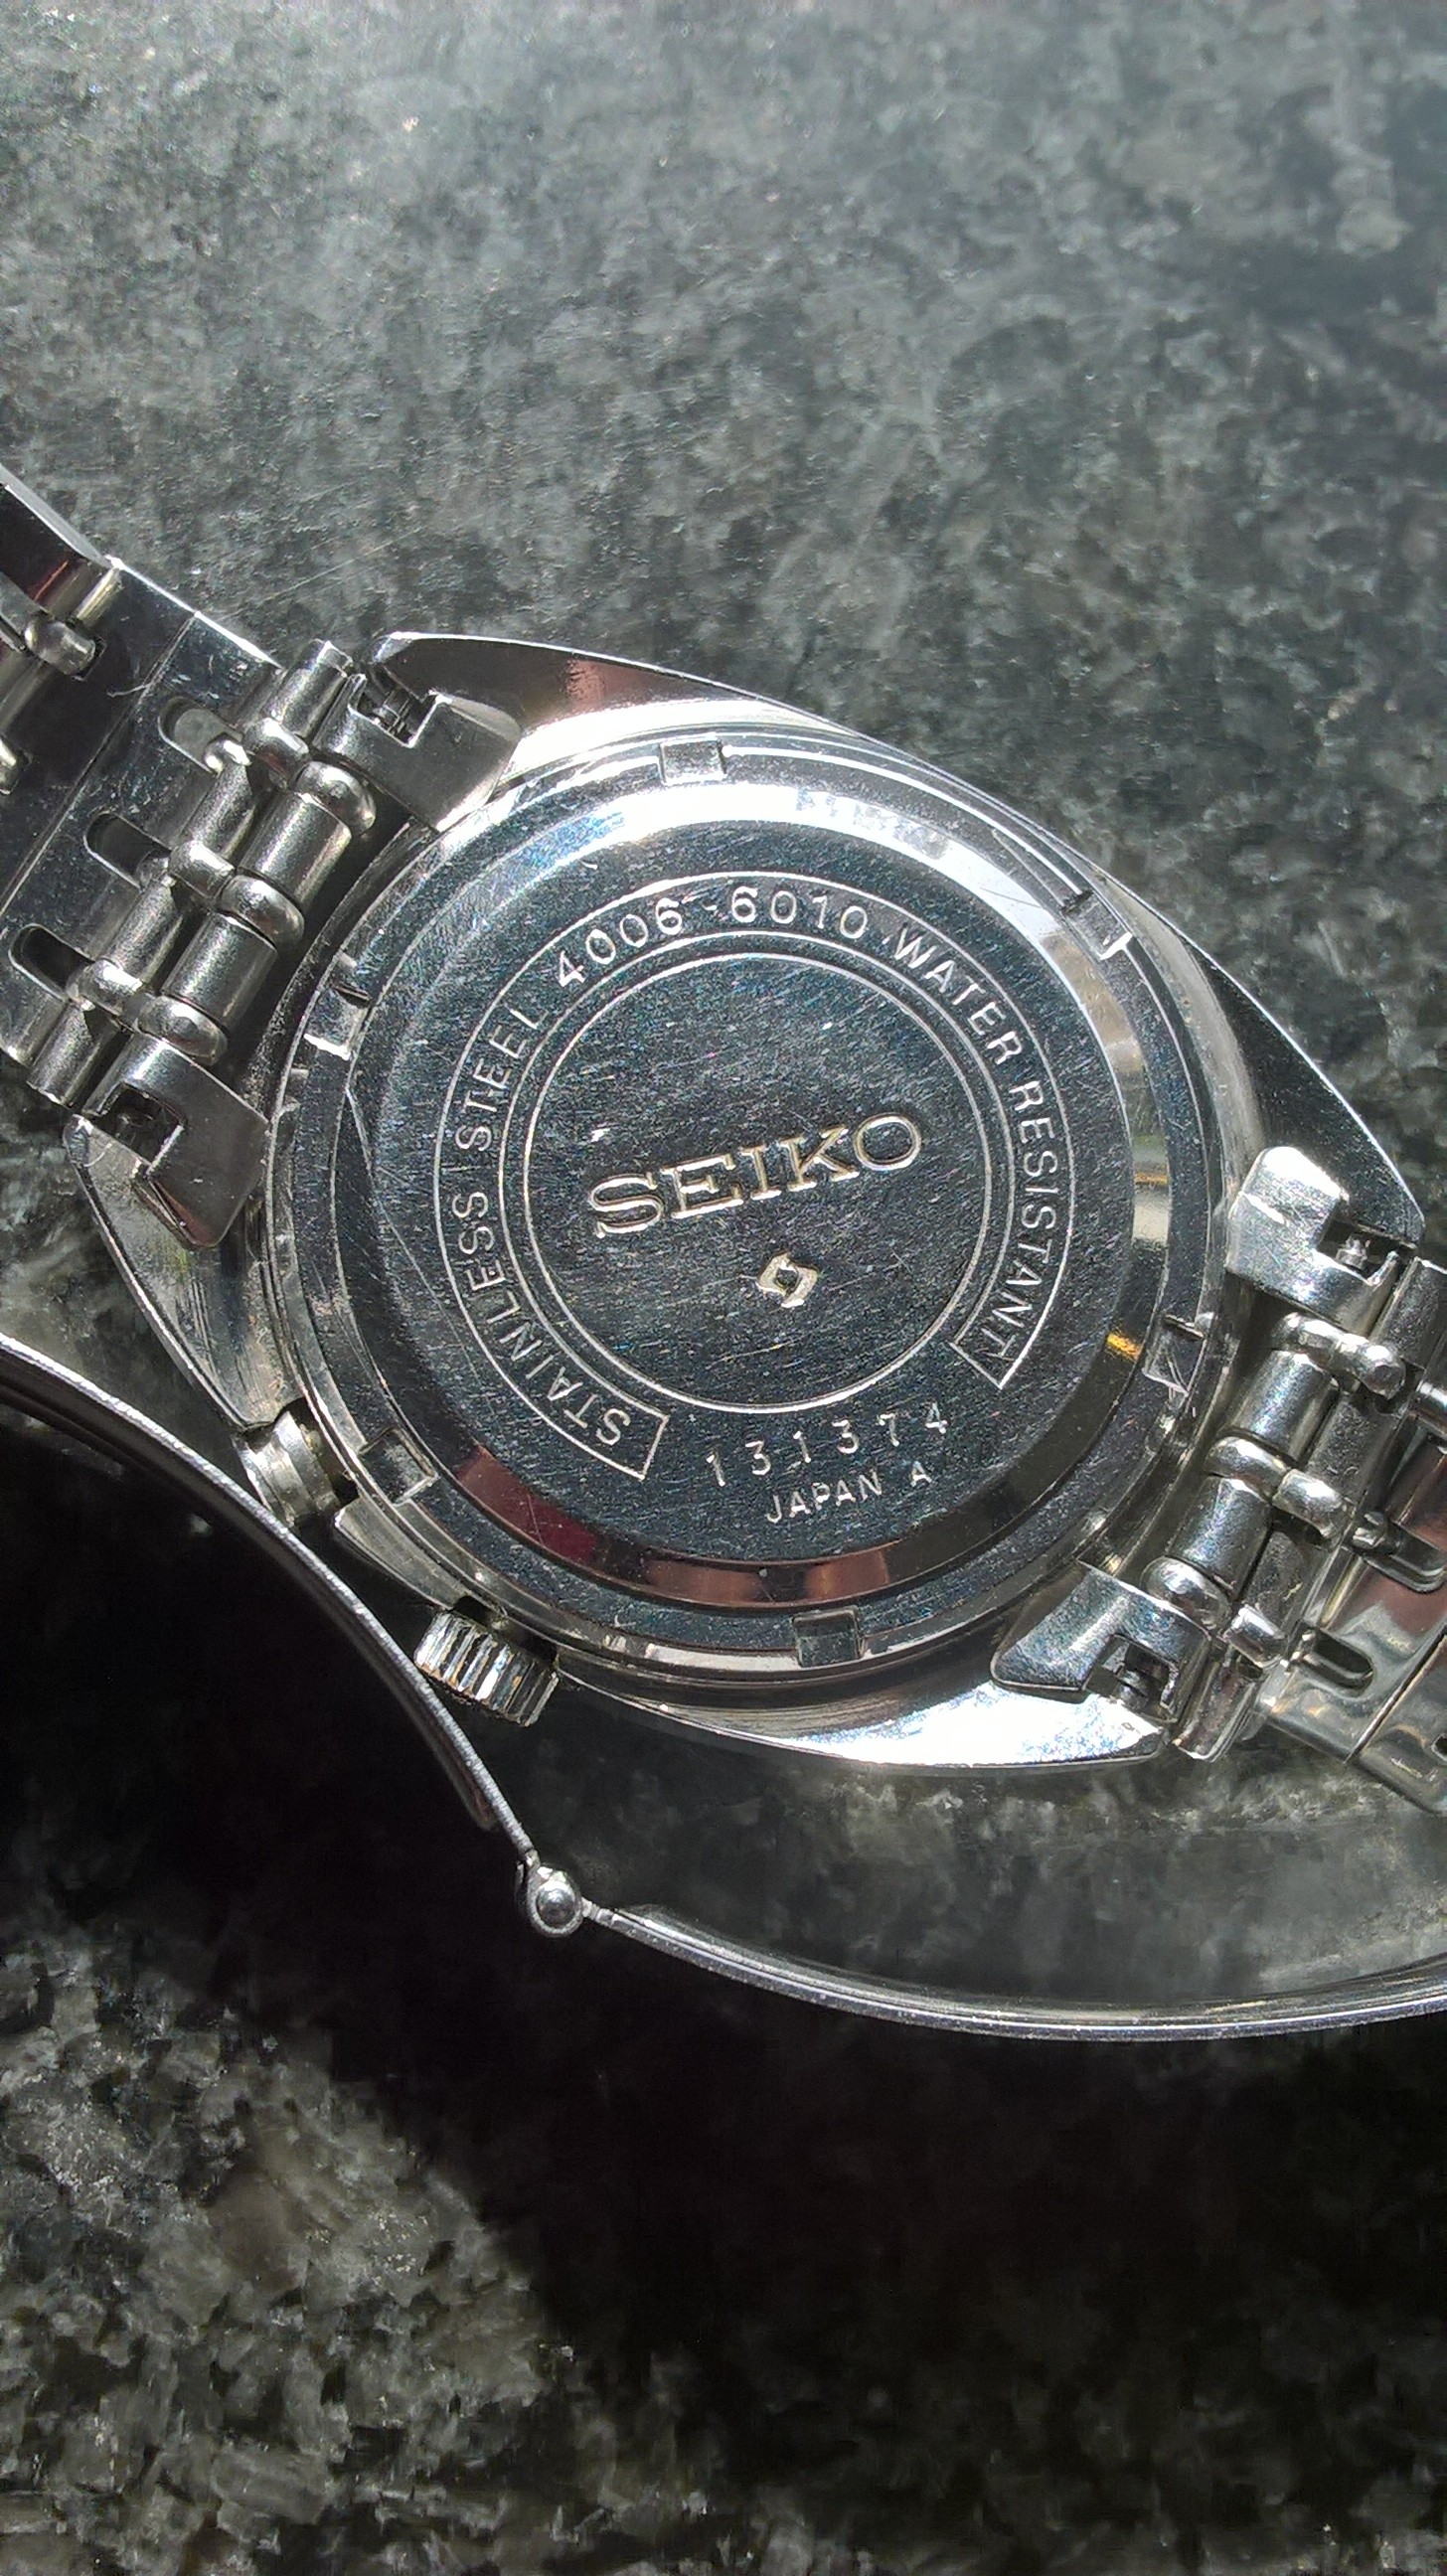 SOLD - Seiko Bell-Matic ref. 4006-6010 | Omega Forums